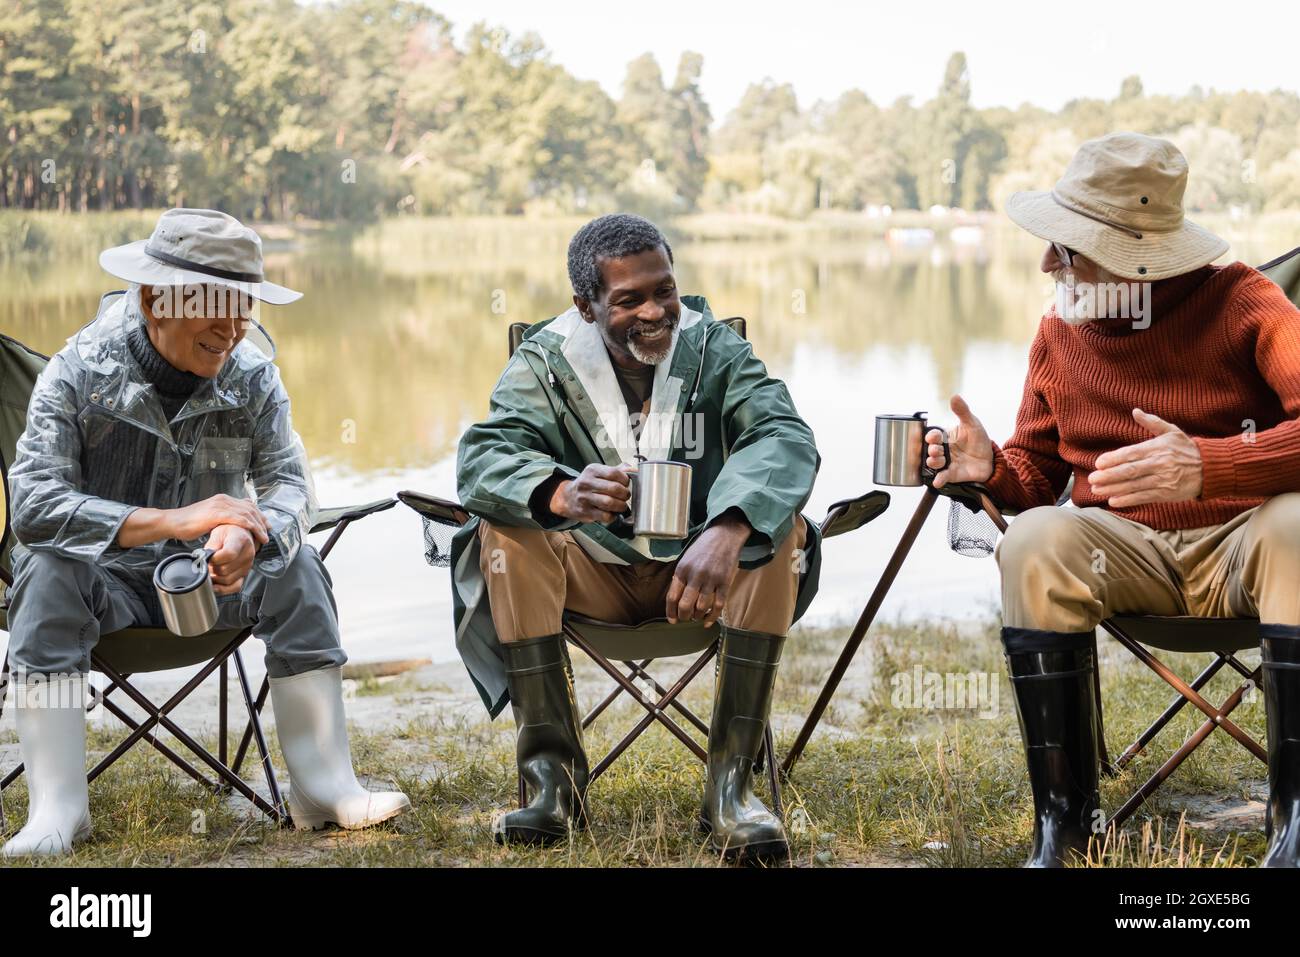 https://c8.alamy.com/comp/2GXE5BG/smiling-multiethnic-men-in-fishing-outfit-holding-thermo-cups-while-talking-on-chairs-near-lake-2GXE5BG.jpg